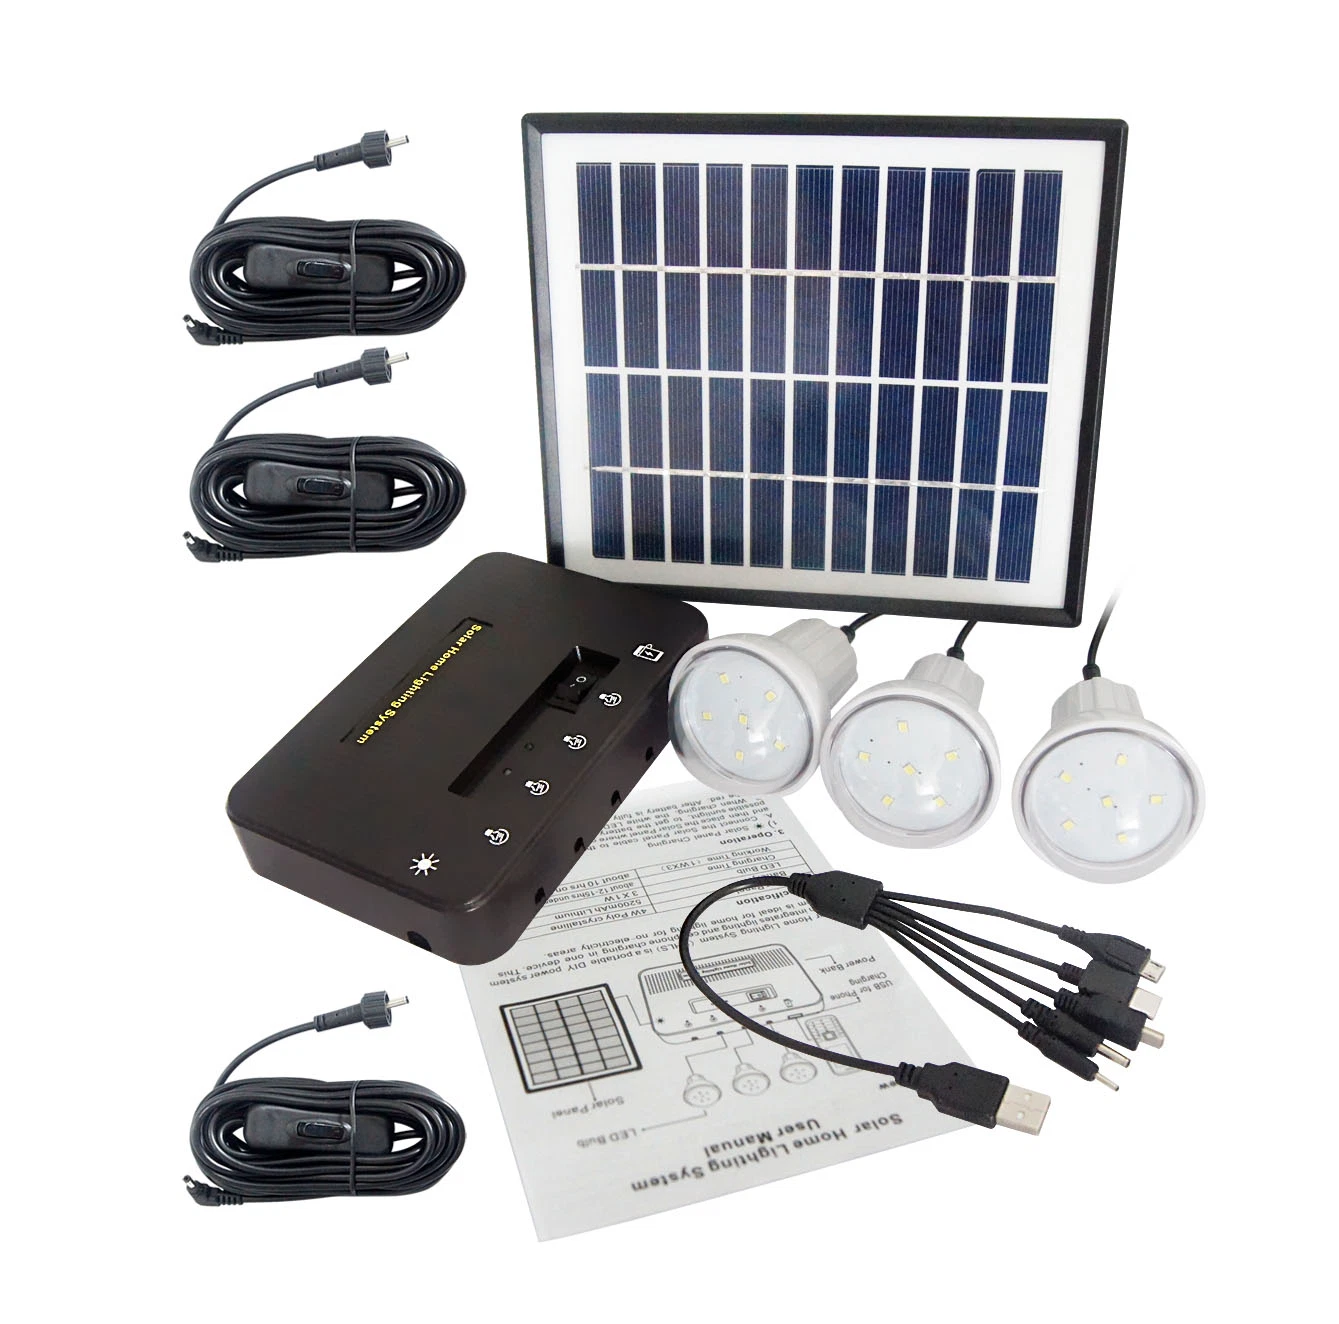 4W Solar 3 Lighting Kit Solar Home System LED Lamp Bulb Light Replaceable Lithium Battery with Phone Charging for Home Use